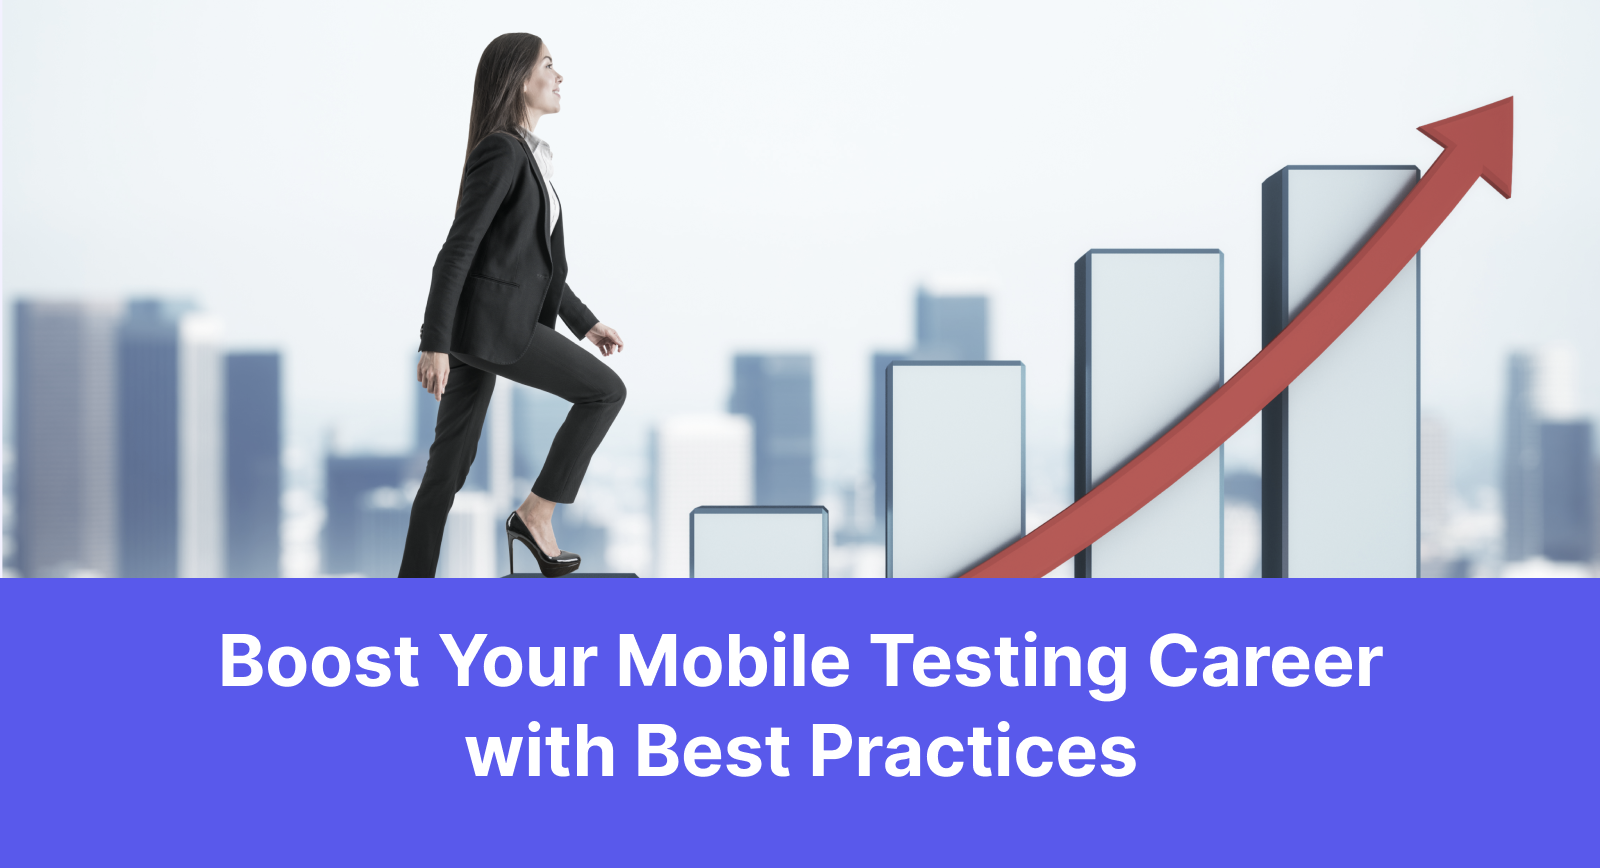 Take A Step Forward And Ace Your Mobile Testing Career 